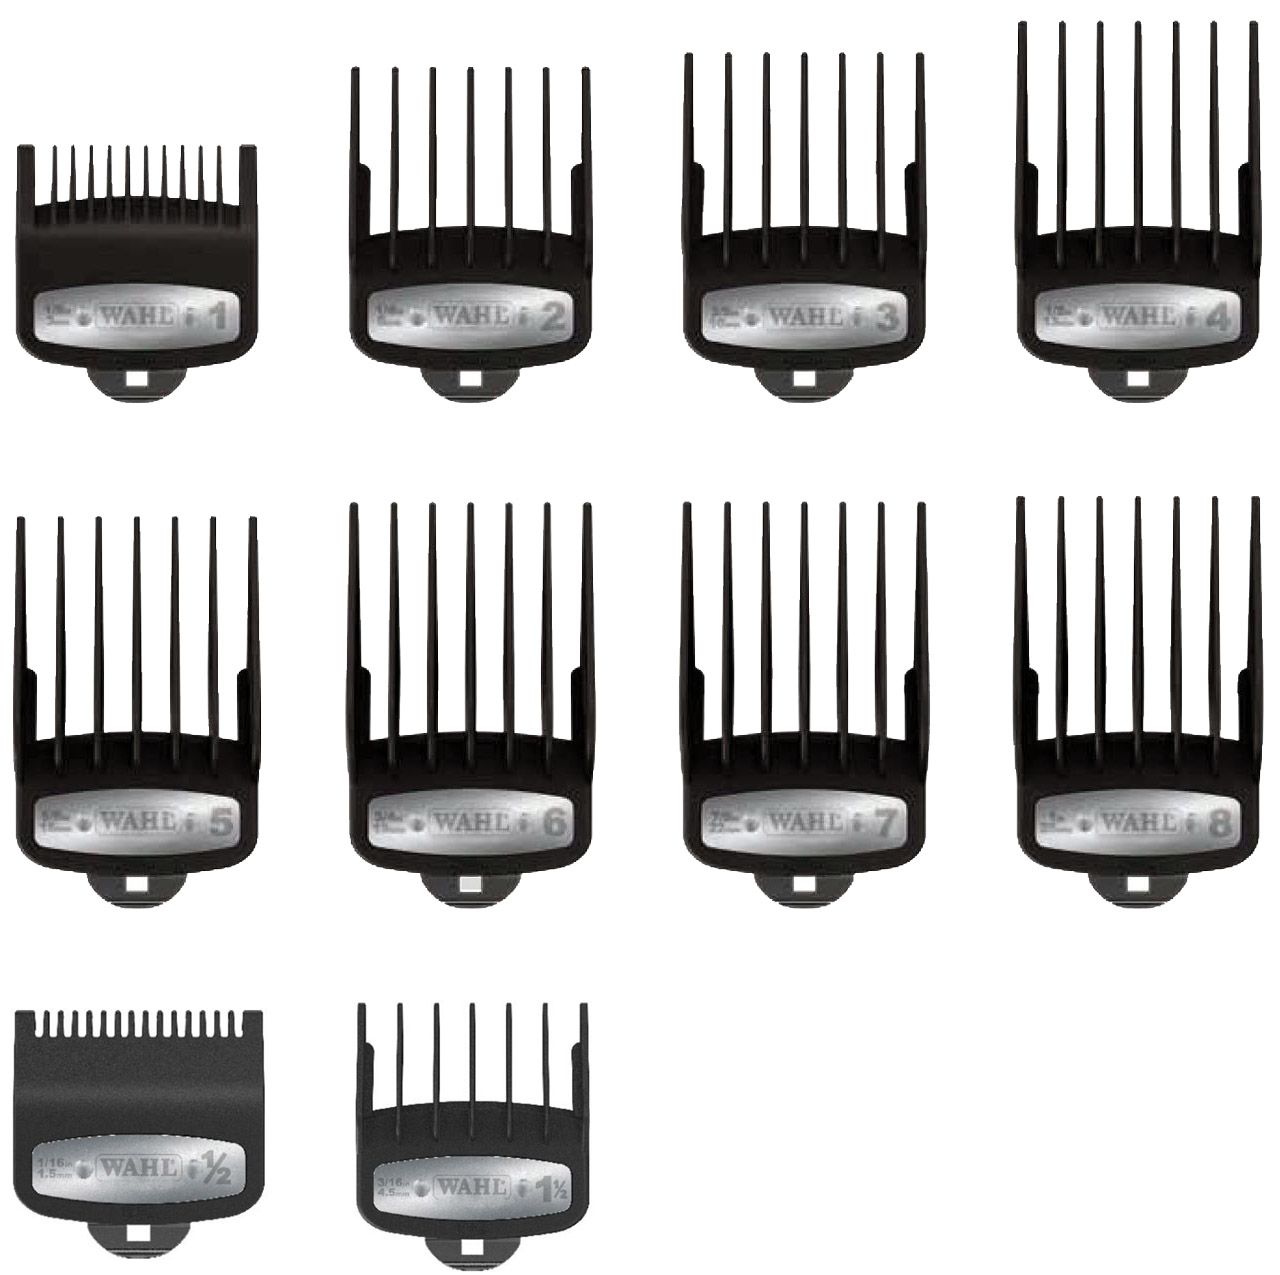 wahl trimmer guide